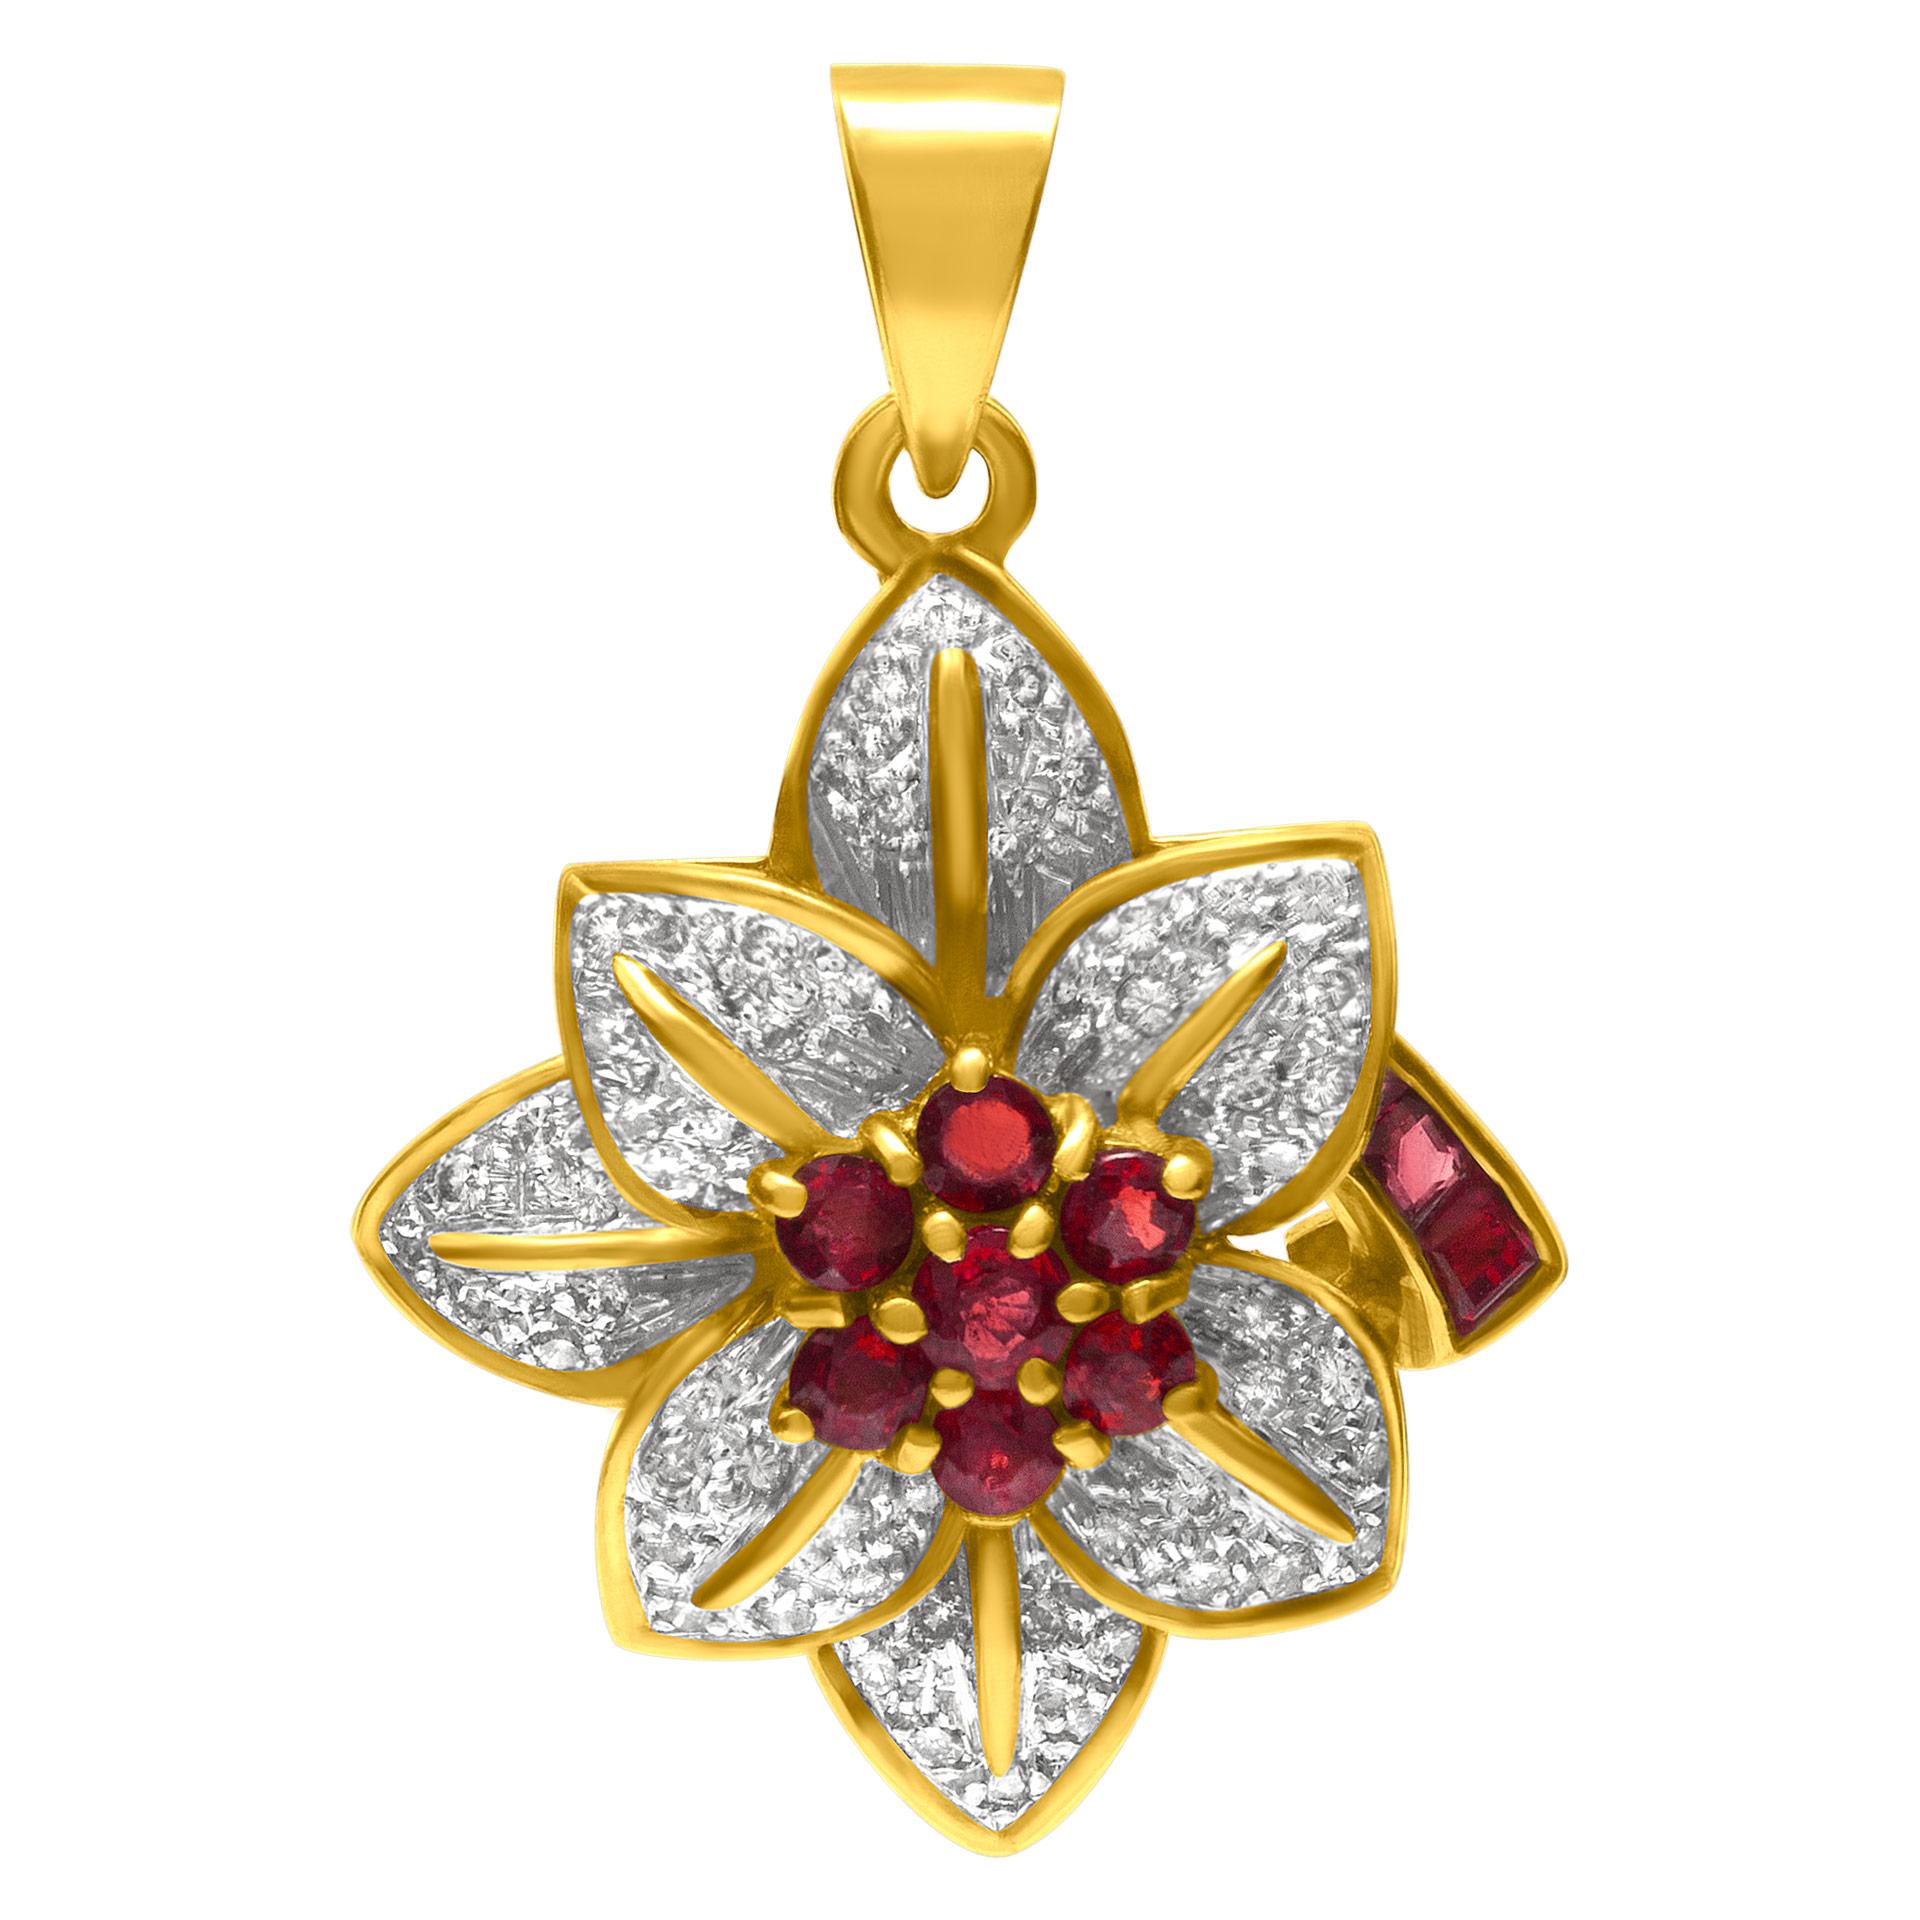 Ruby and Diamonds Flower Ring and Pendant, 2 Pieces Set in 18k Yellow Gold For Sale 1